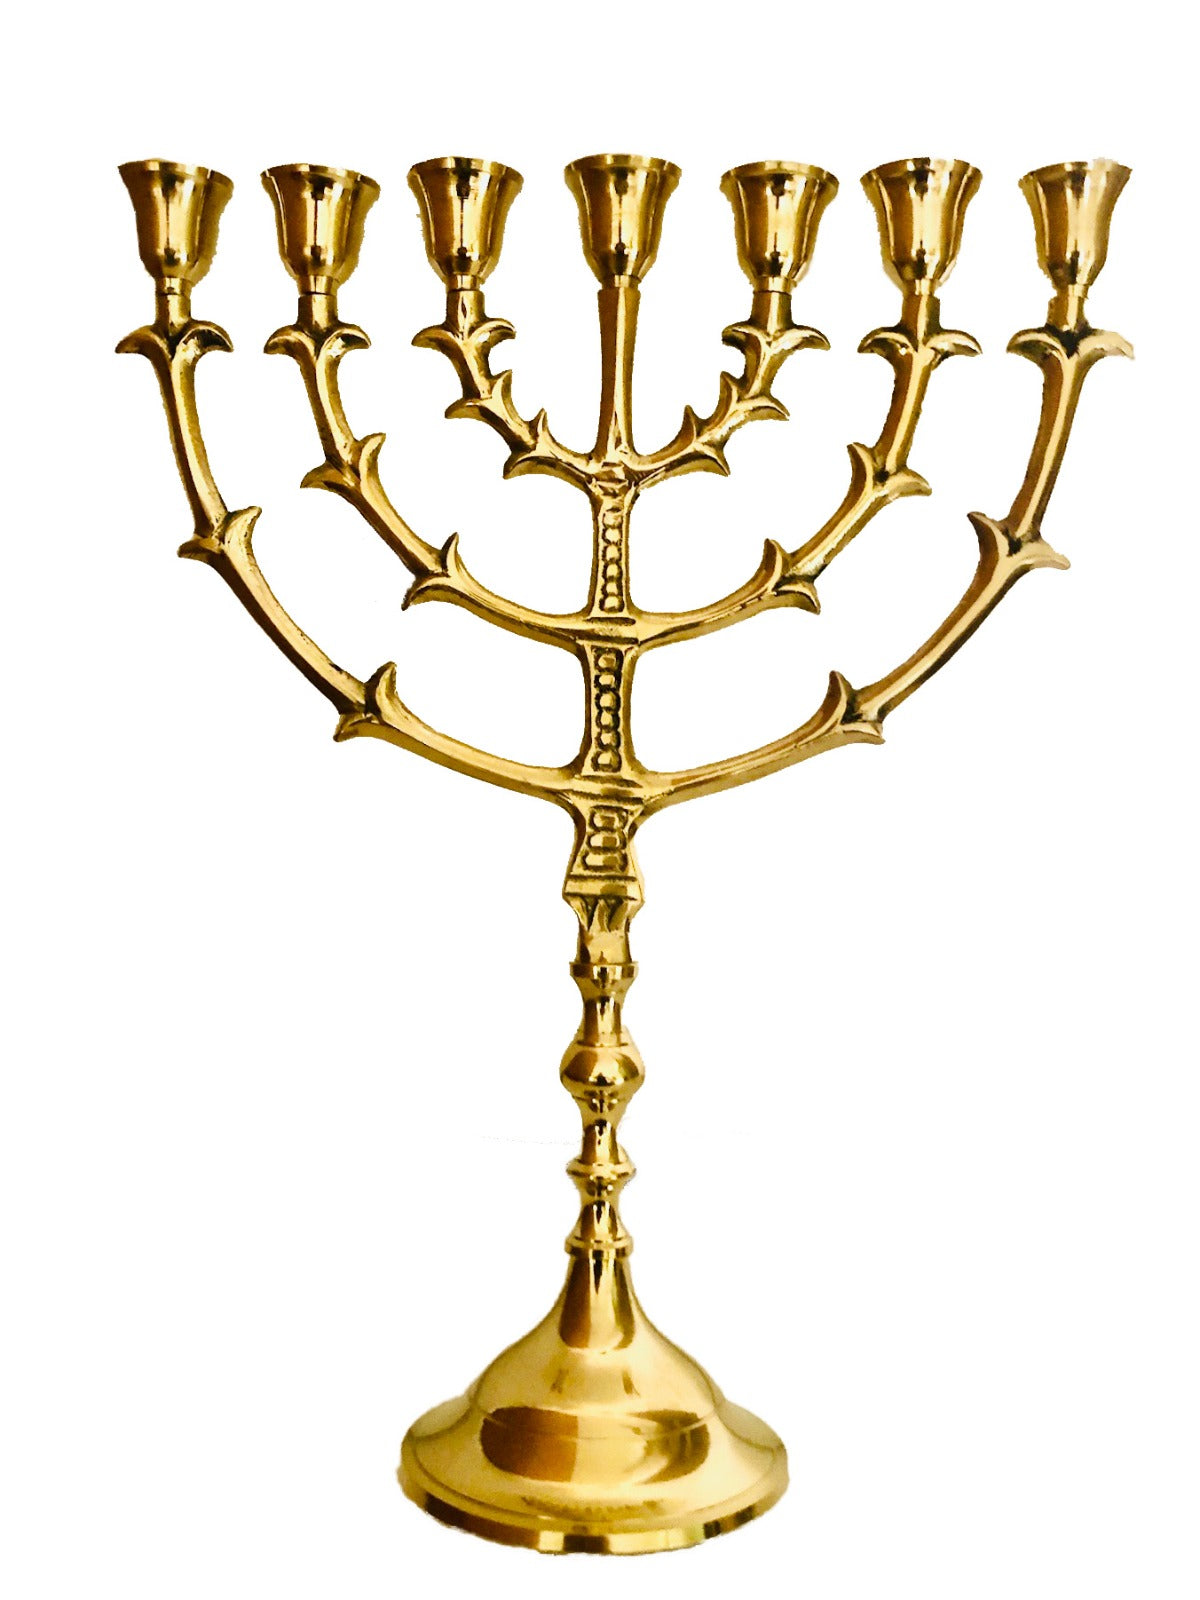 Menorah Solid Brass/Copper 12" inches Bronze 7 Branches Menorah Candle Holder